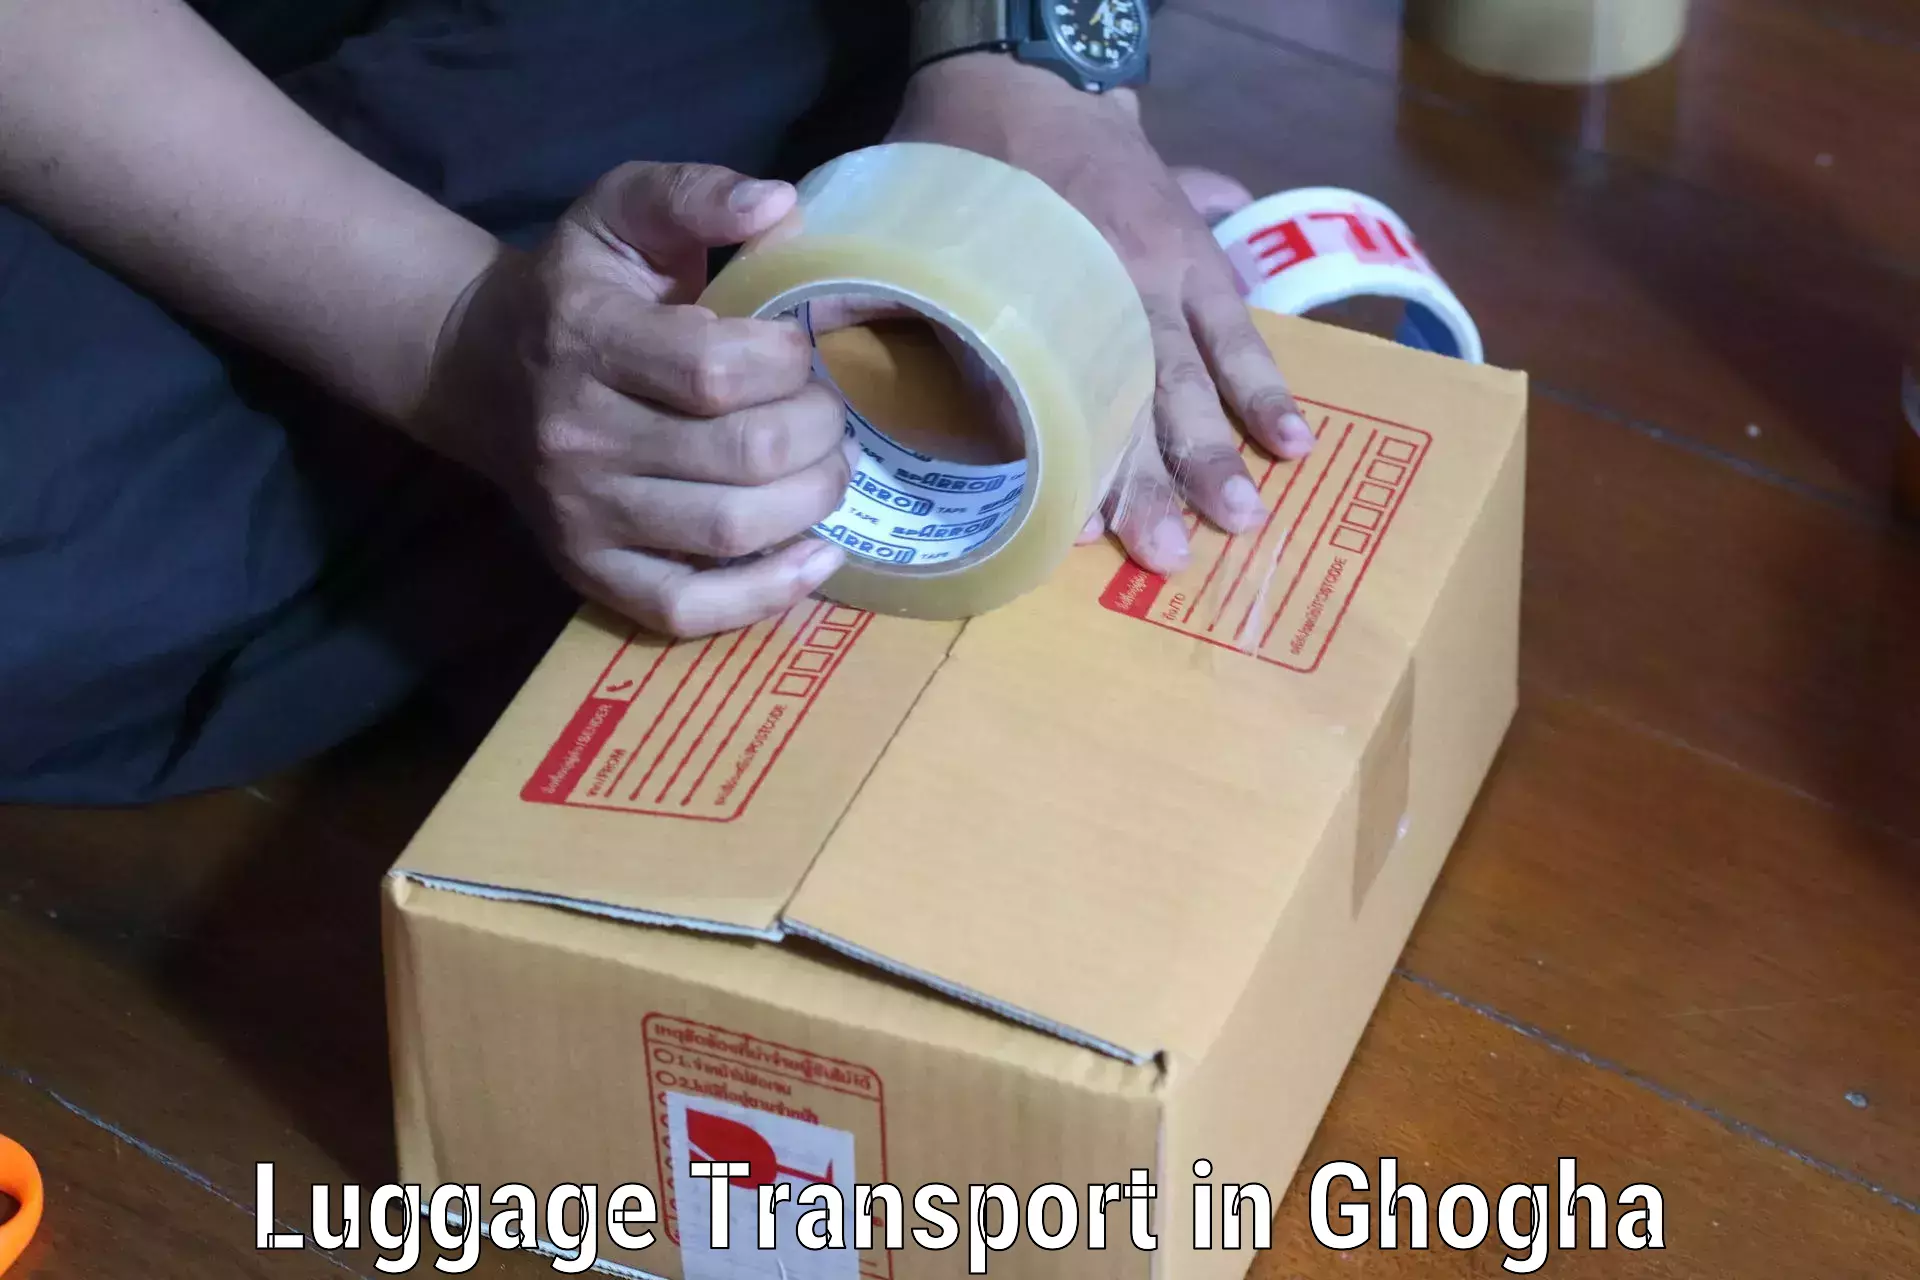 Baggage transport management in Ghogha